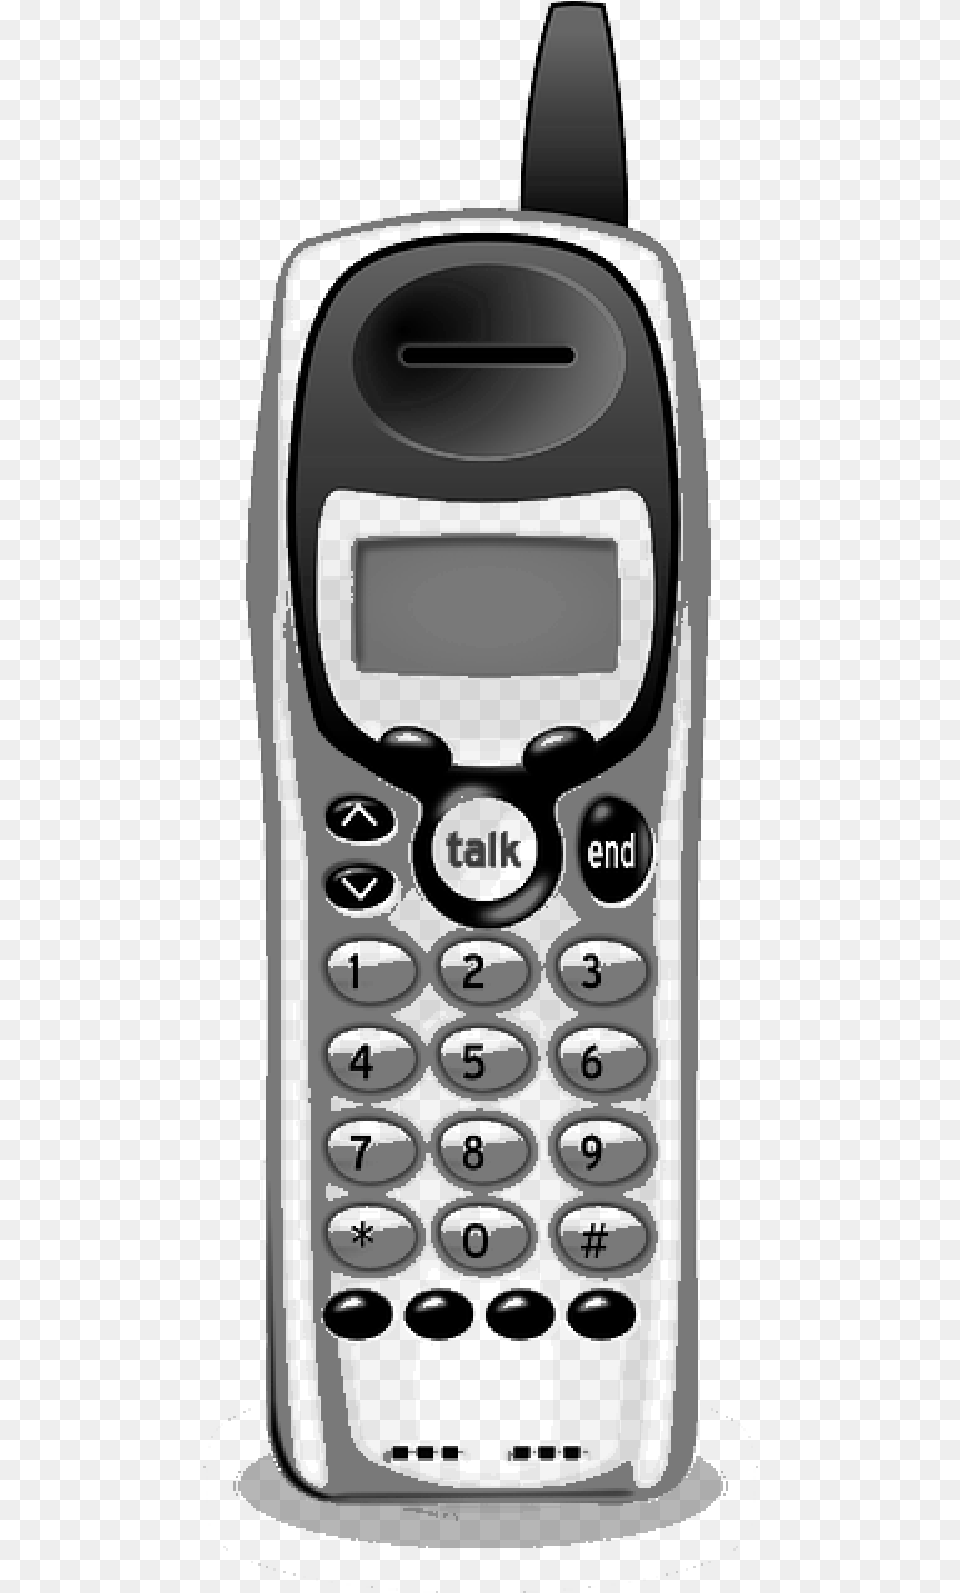 Cordless Telephone Telephones Used In Present, Electronics, Mobile Phone, Phone, Texting Png Image